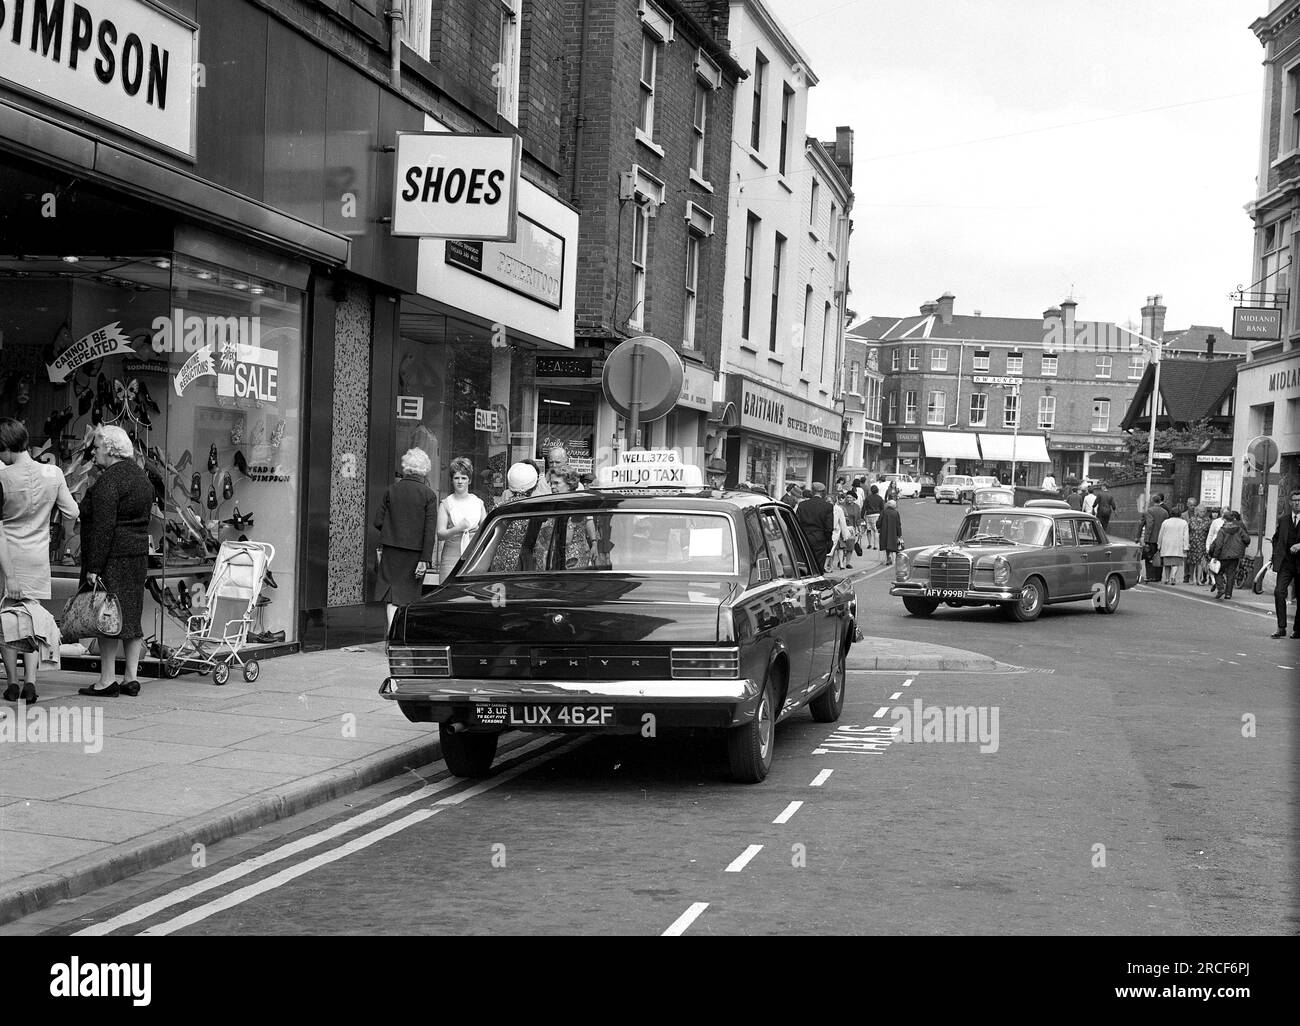 Ford Zephyr taxi car in taxi rank Busy provincial market town England  Britain Uk 1960s Stock Photo